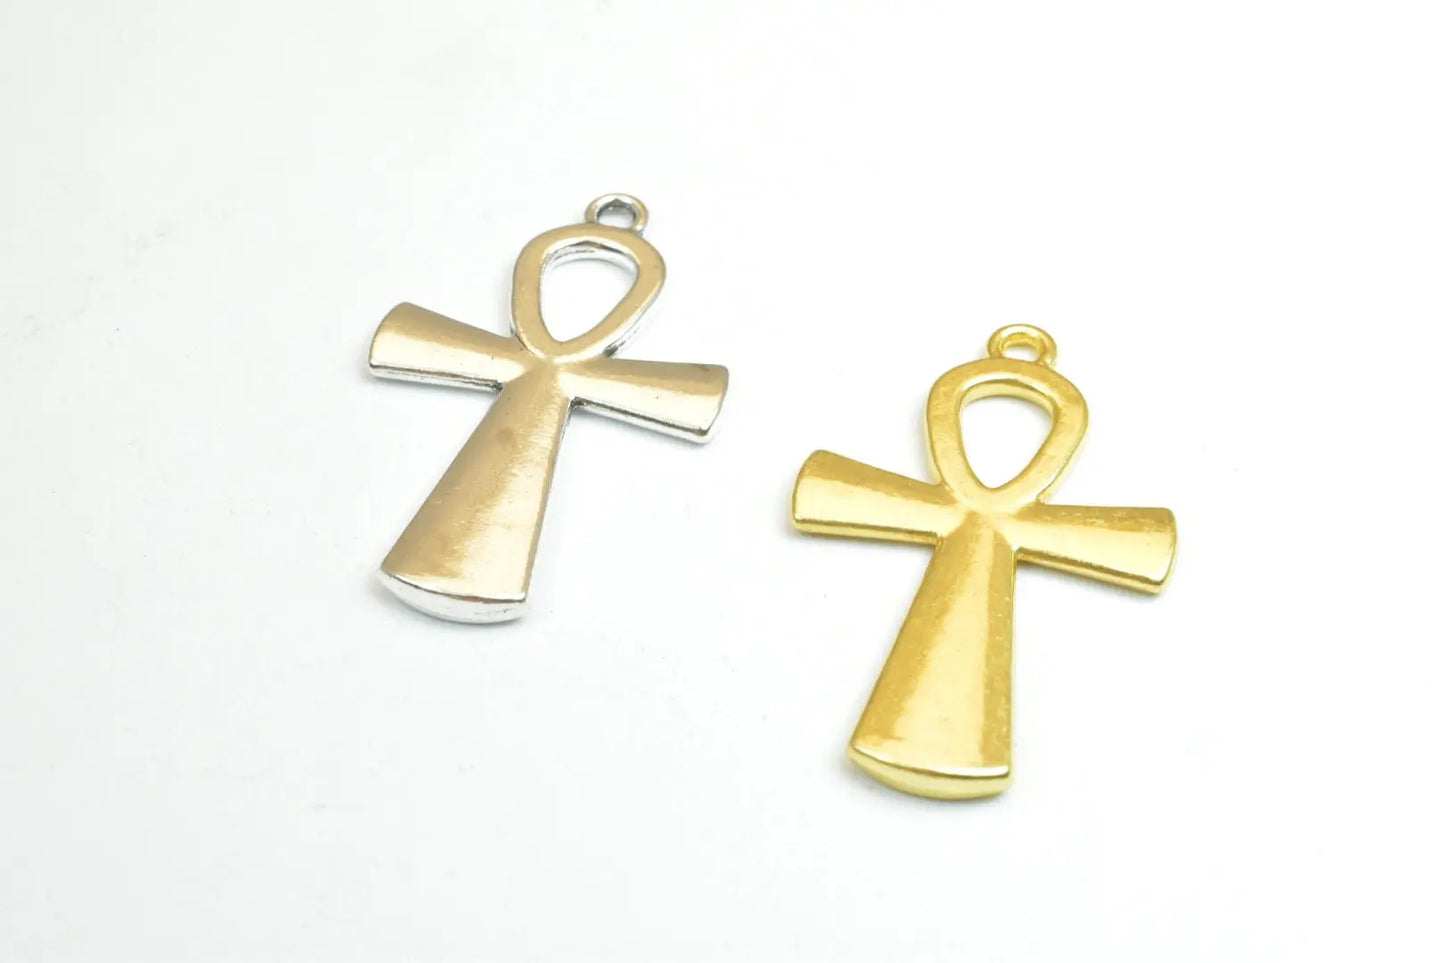 15PCs Egyptian Ankh Life Symbol Key Charm Size 36x23mm Silver or Gold Charm Egyptian Pendant For Jewelry Making - BeadsFindingDepot